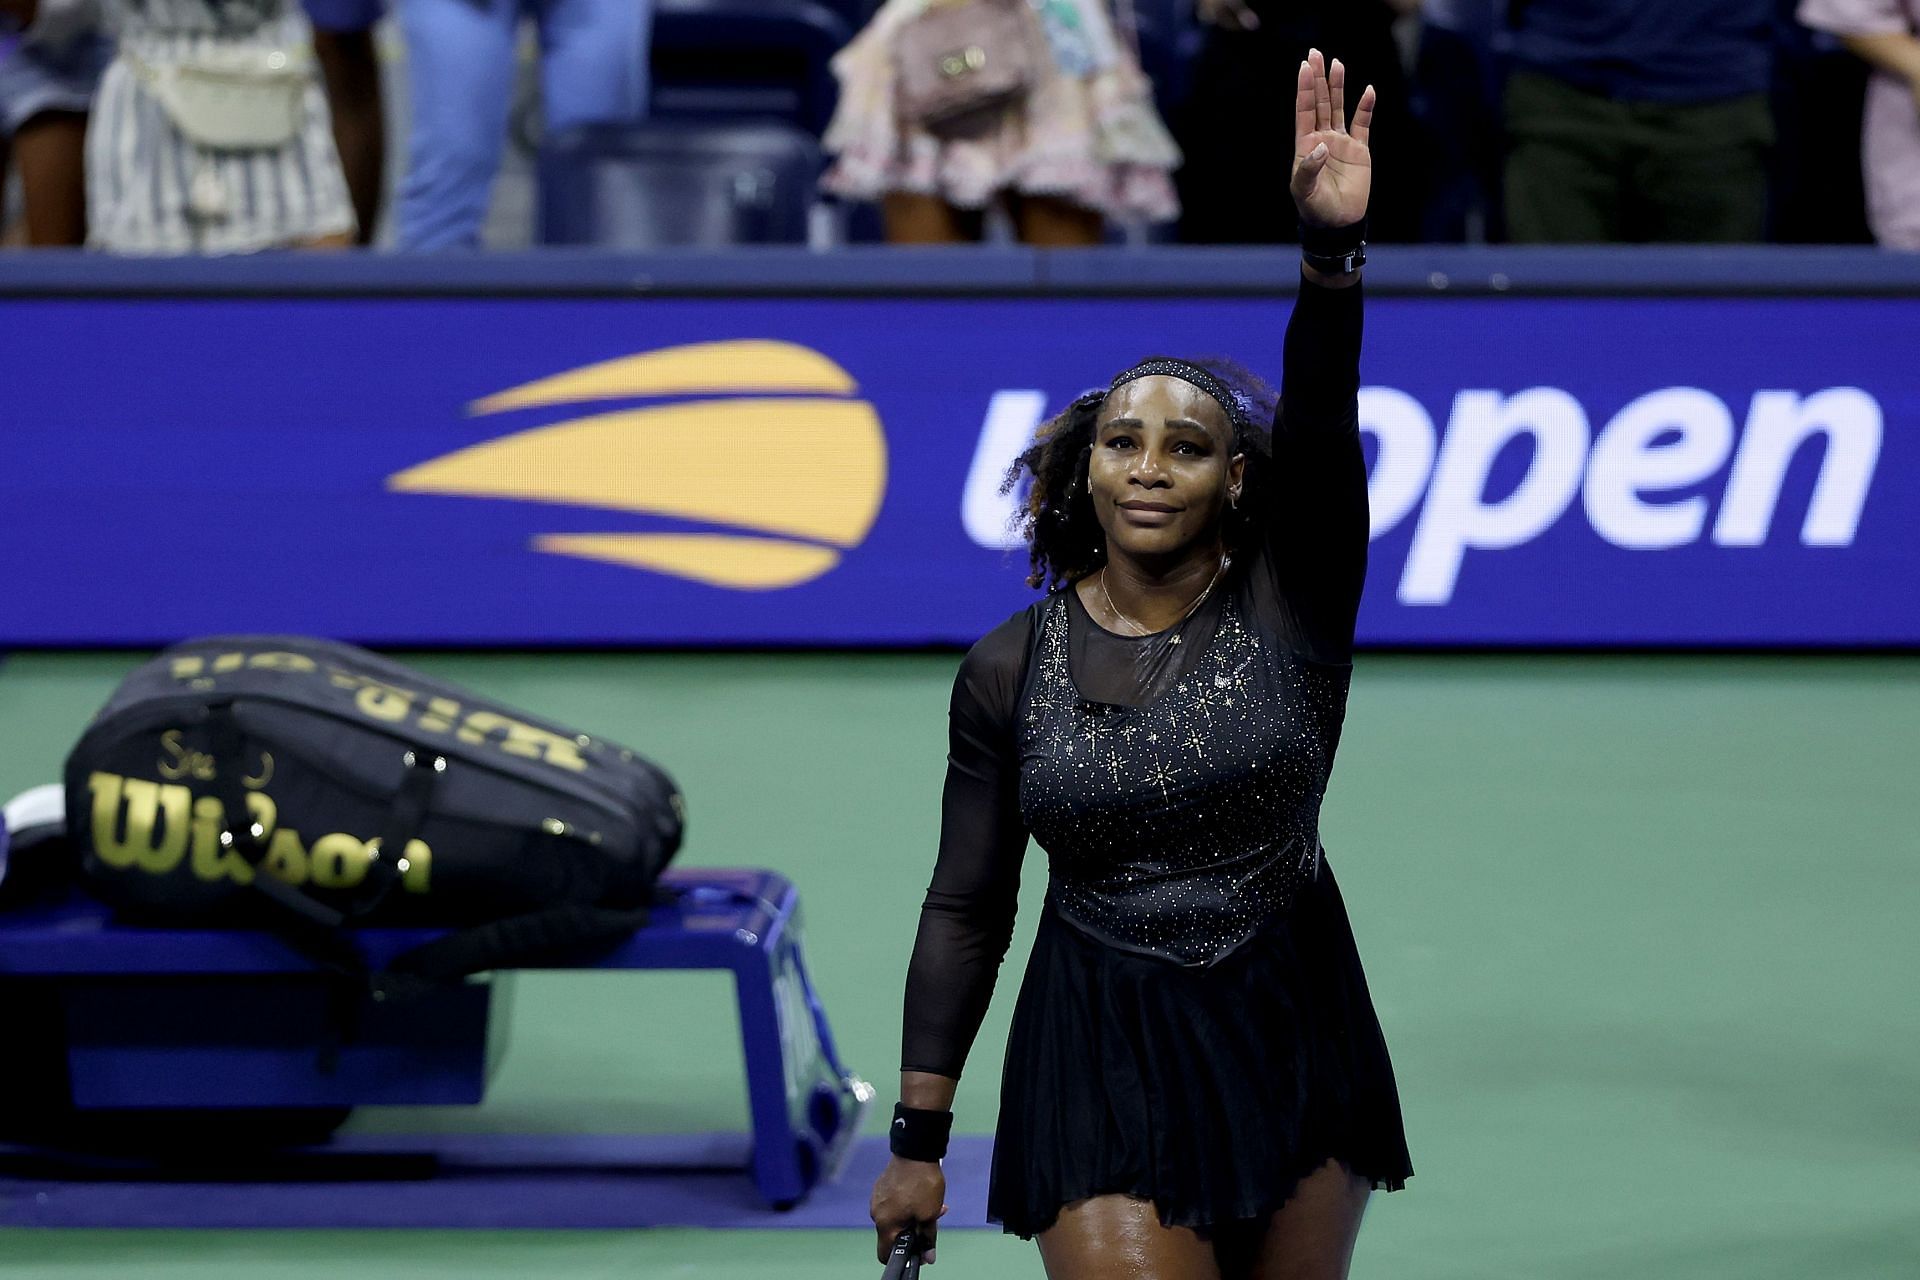 Serena Williams after her last match at the 2022 US Open